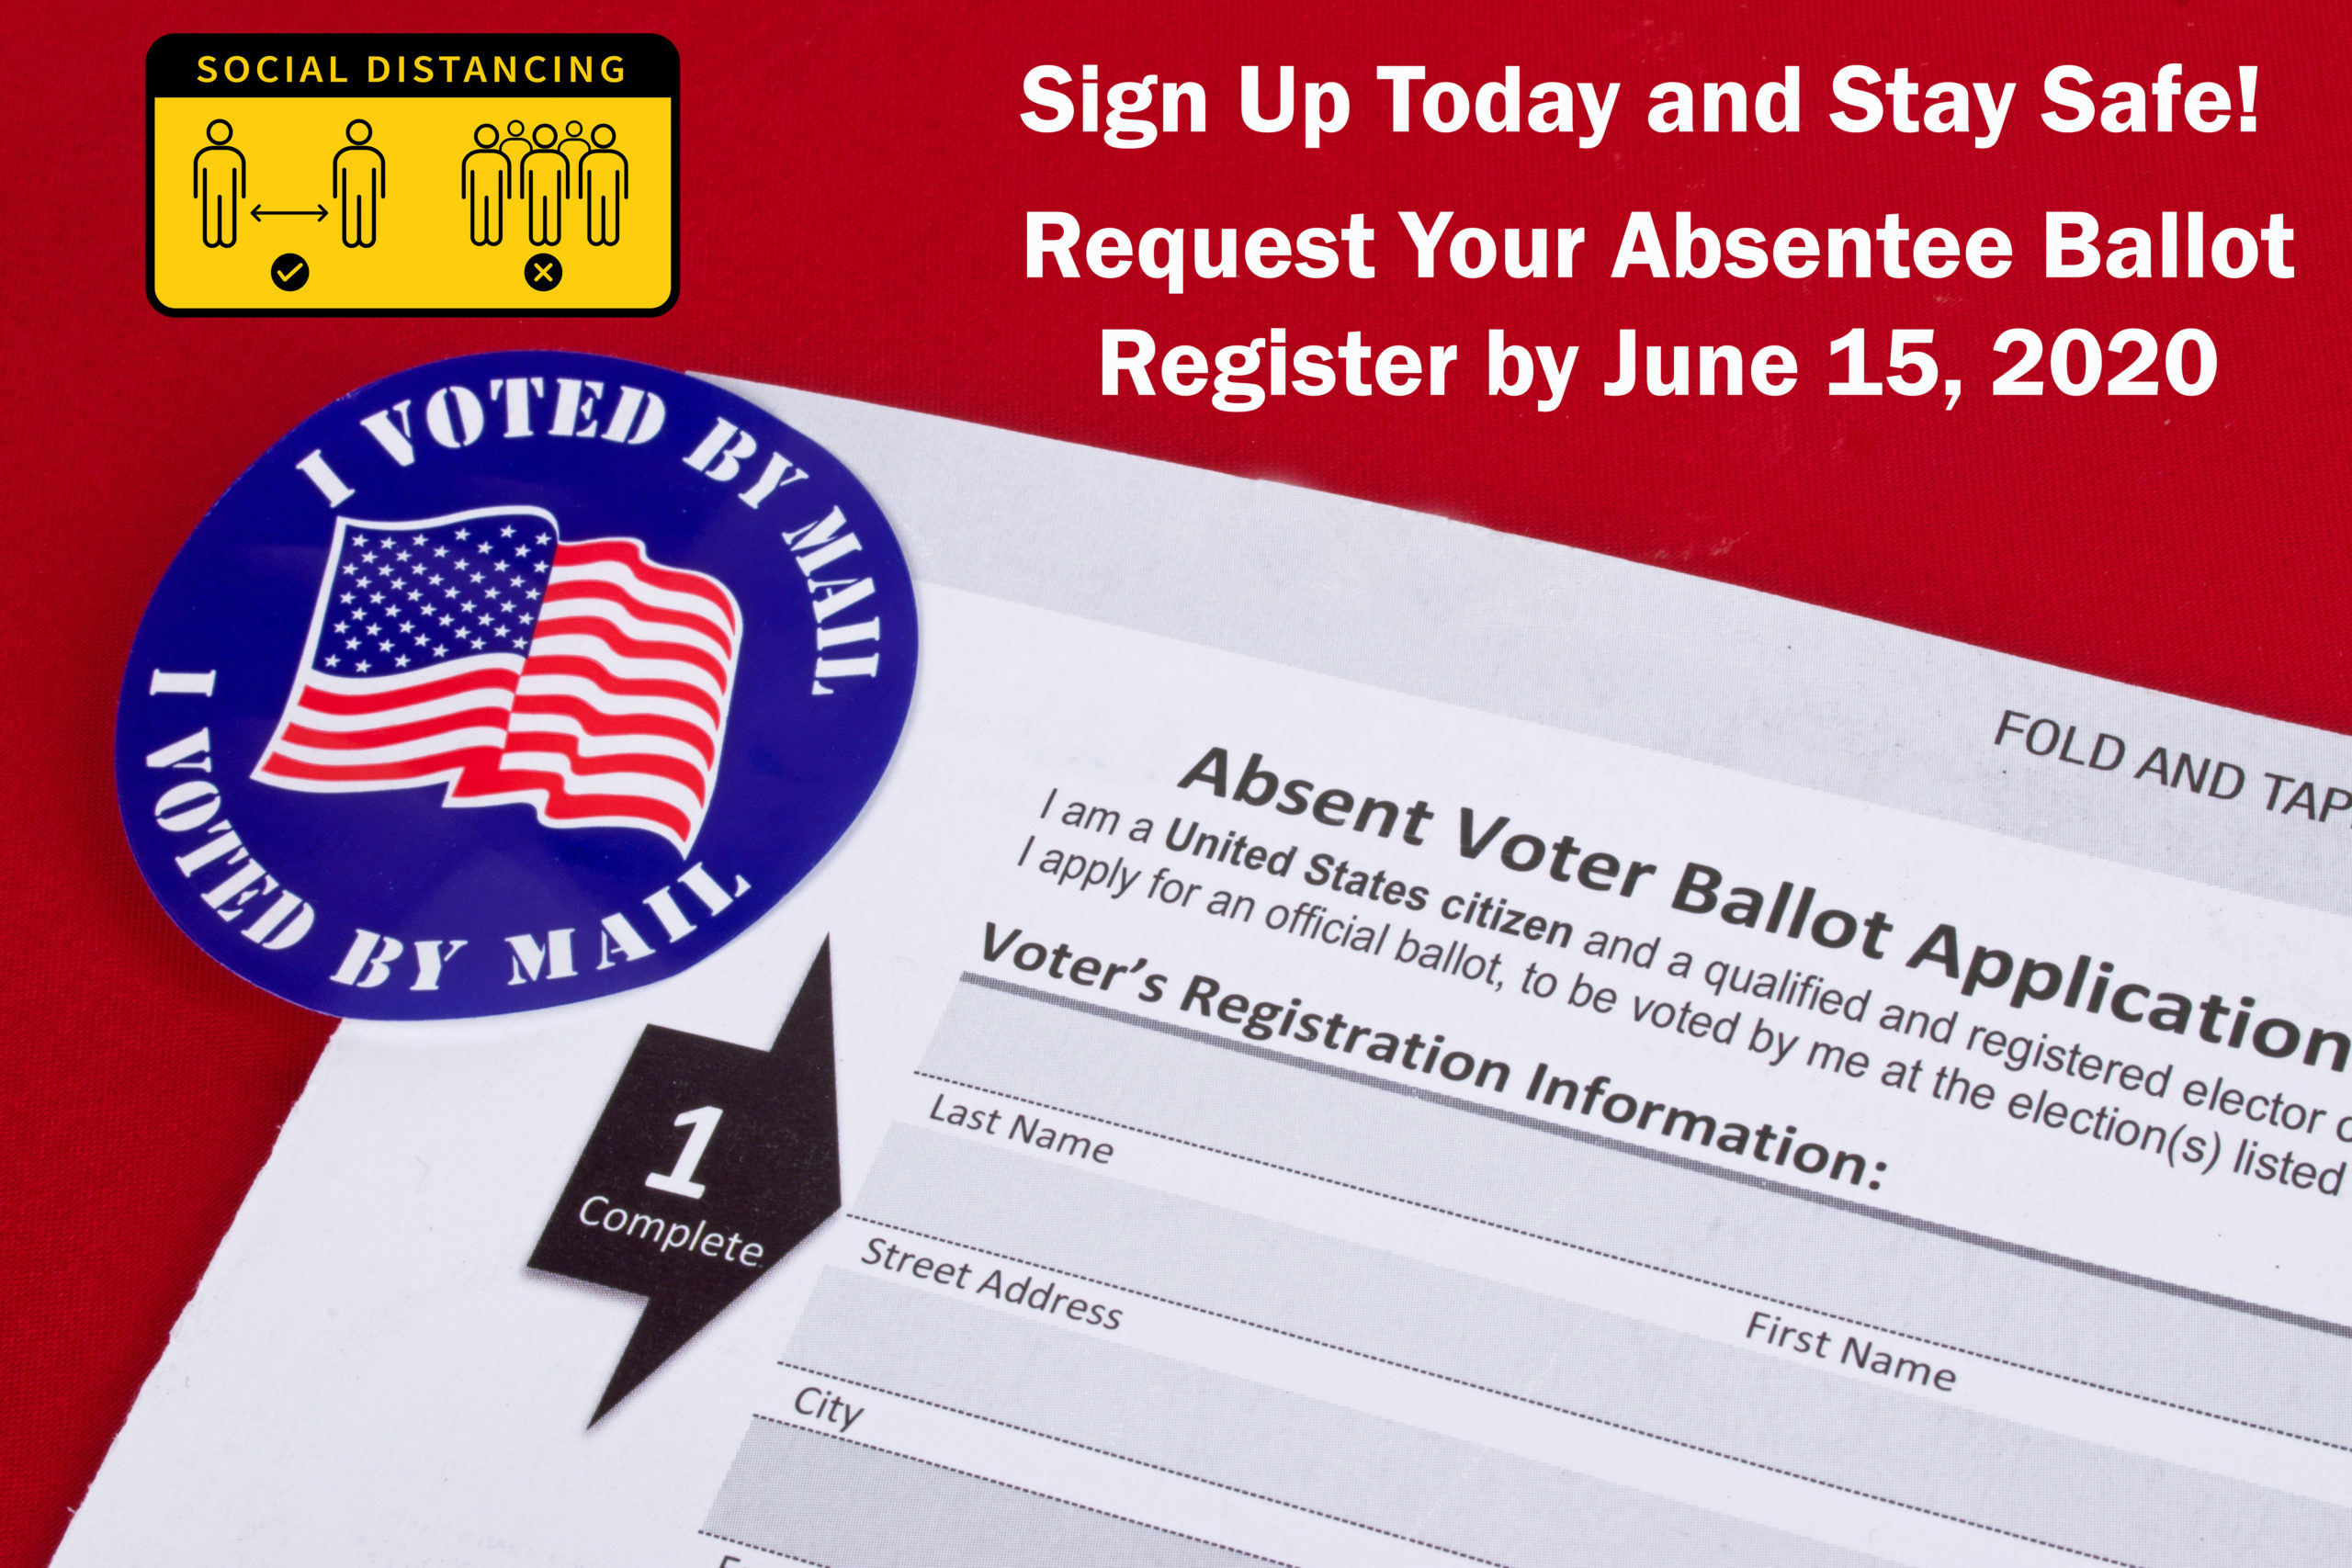 Stay Safe and Request Your Absentee Ballot By June 15th!